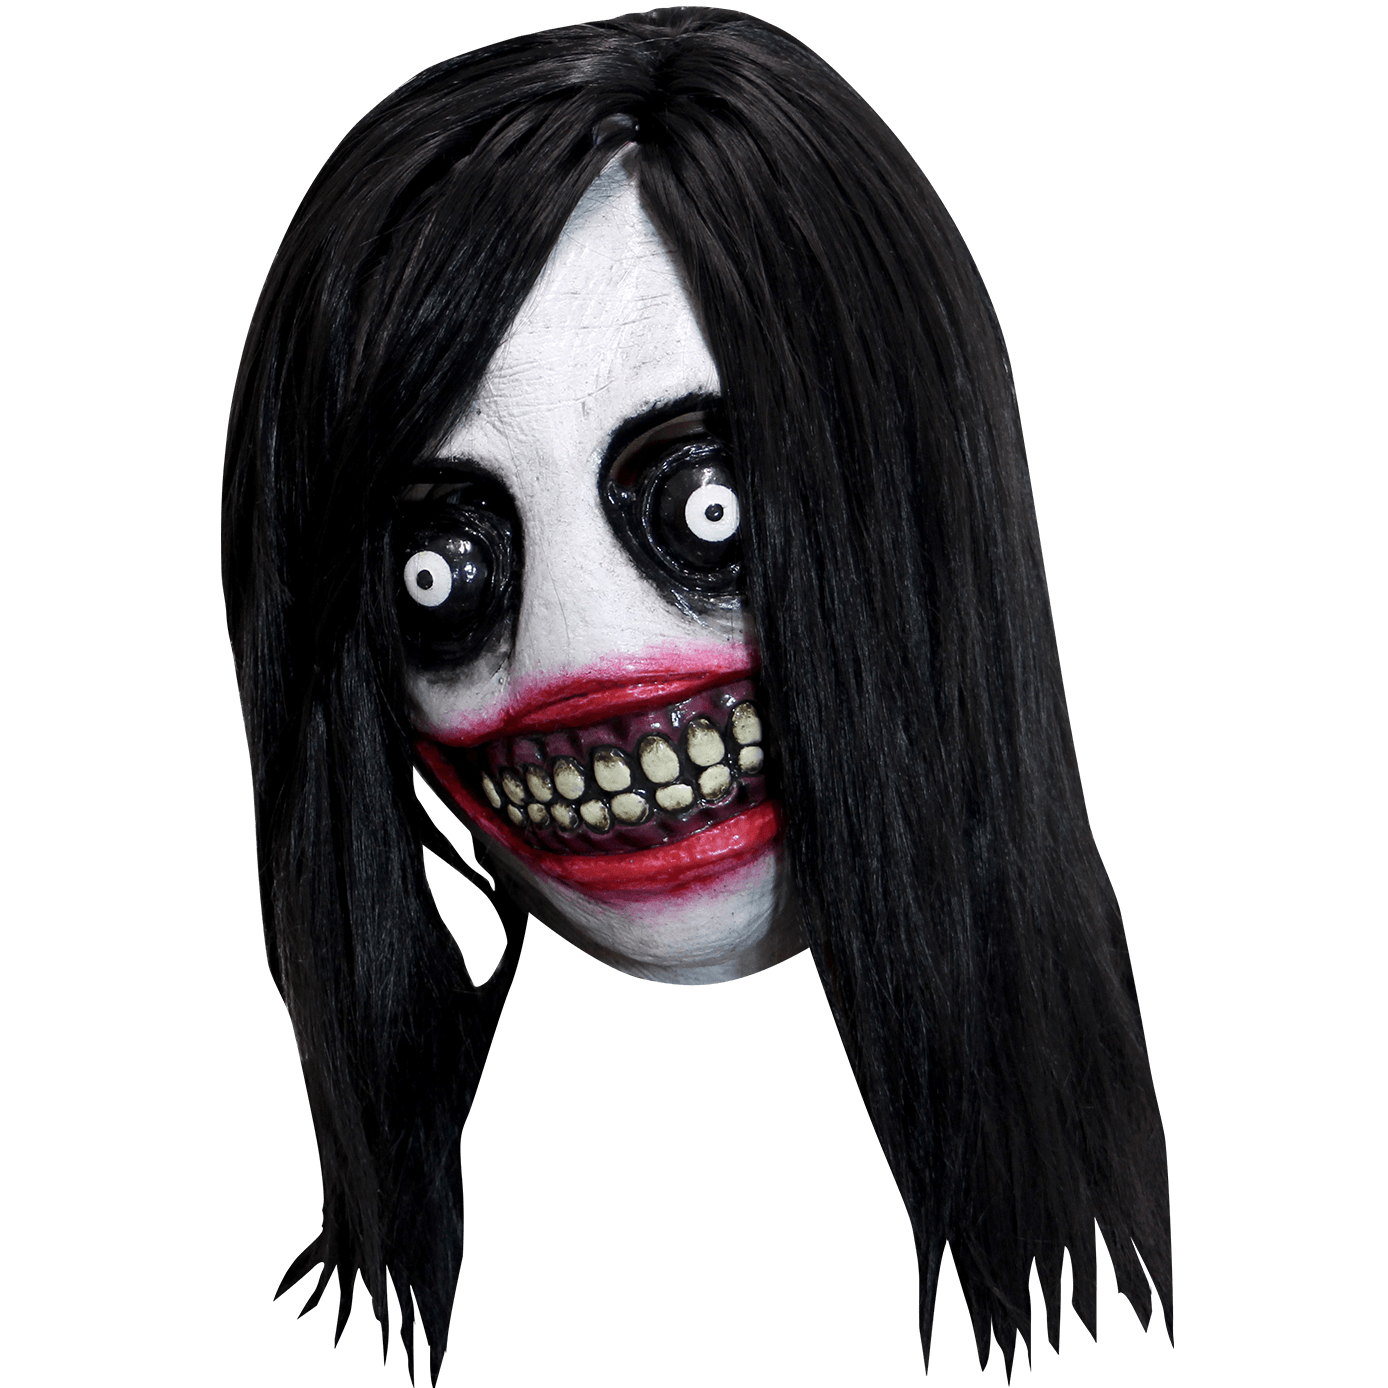 Hoodie/creepypasta  Hoodie creepypasta, Creepypasta characters, Jeff the  killer